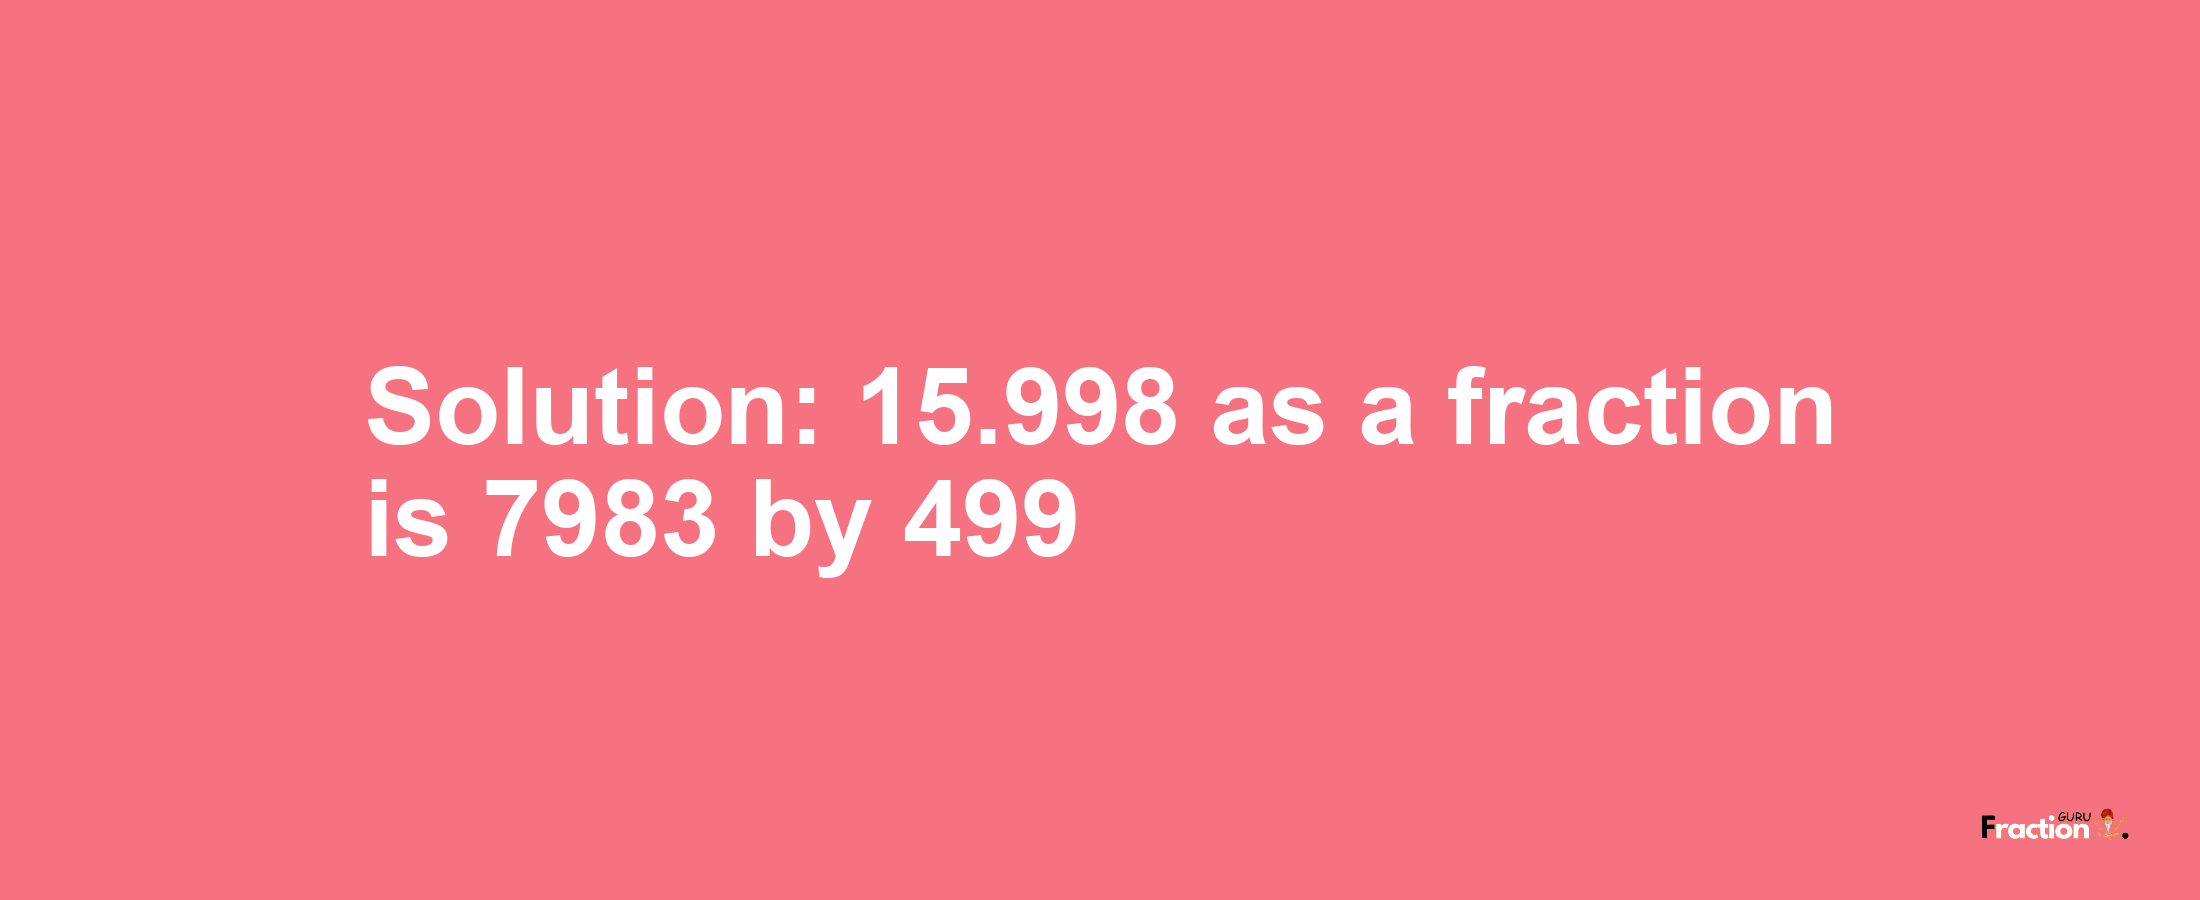 Solution:15.998 as a fraction is 7983/499